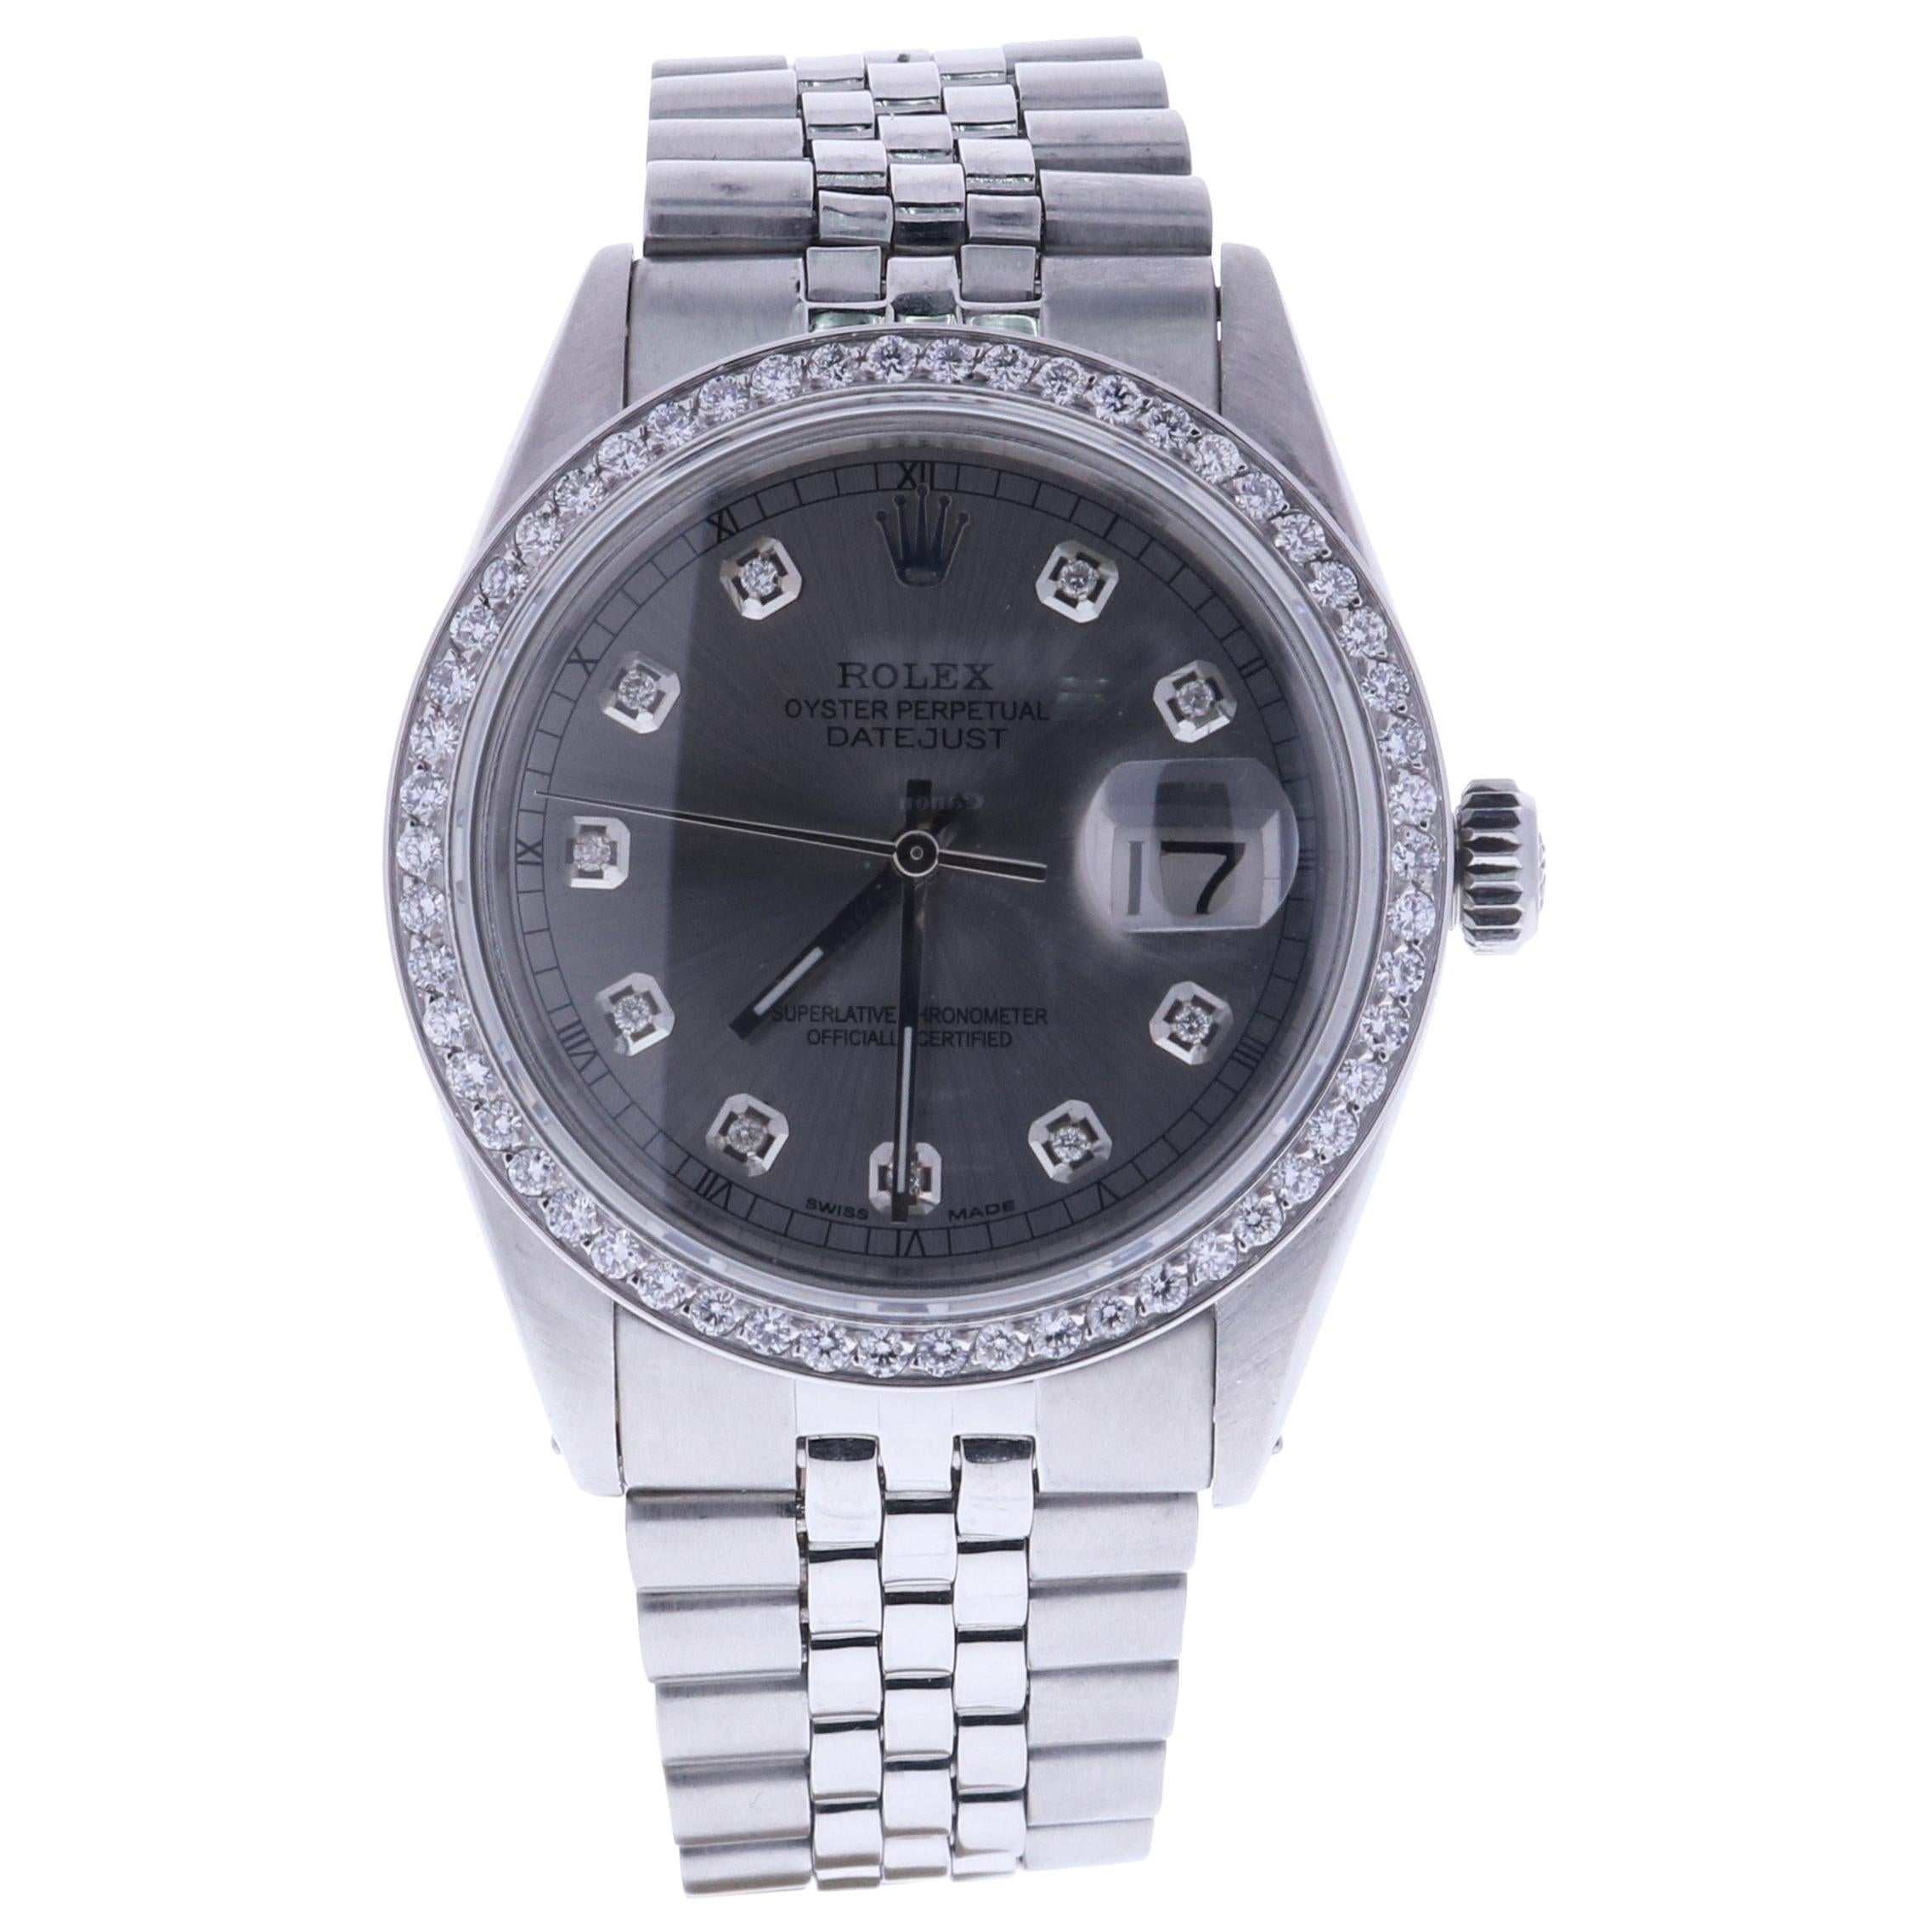 Certified 1979 Rolex Datejust 16014 Grey Dial For Sale